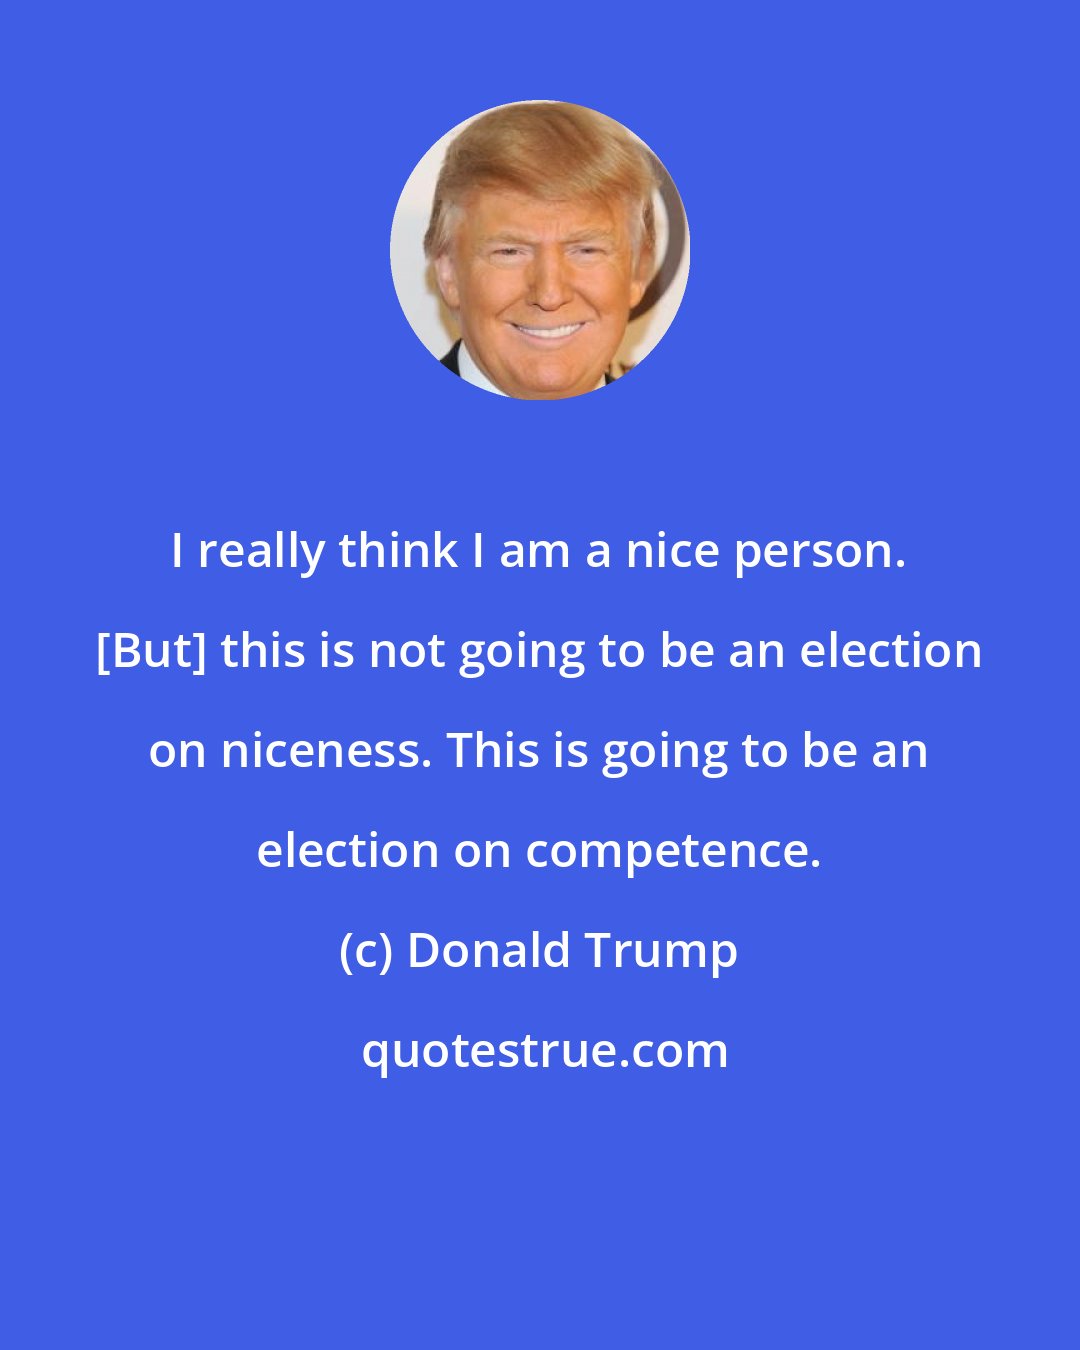 Donald Trump: I really think I am a nice person. [But] this is not going to be an election on niceness. This is going to be an election on competence.